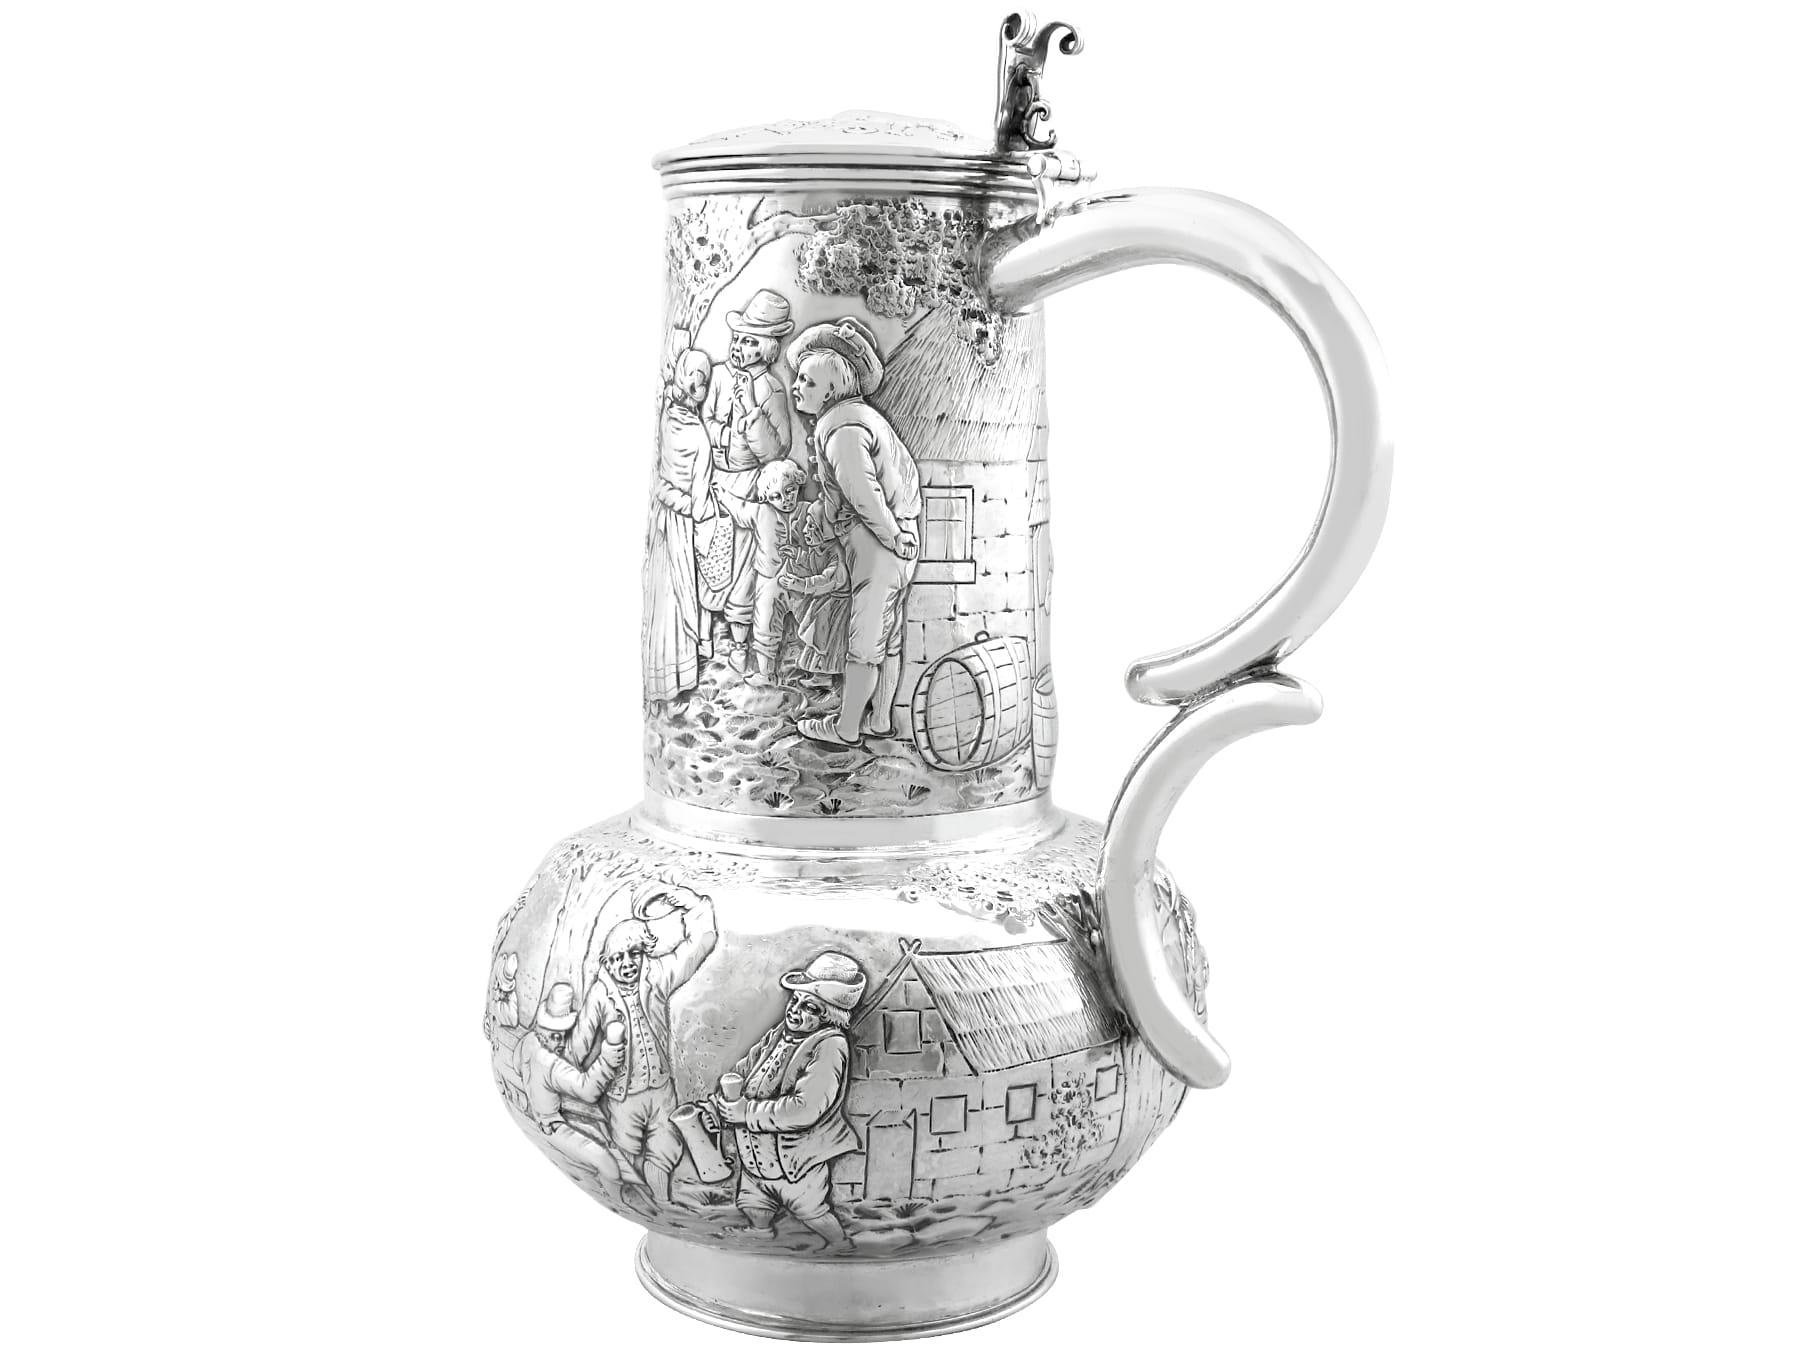 Antique Arts & Crafts Style German Silver Flagon In Excellent Condition For Sale In Jesmond, Newcastle Upon Tyne